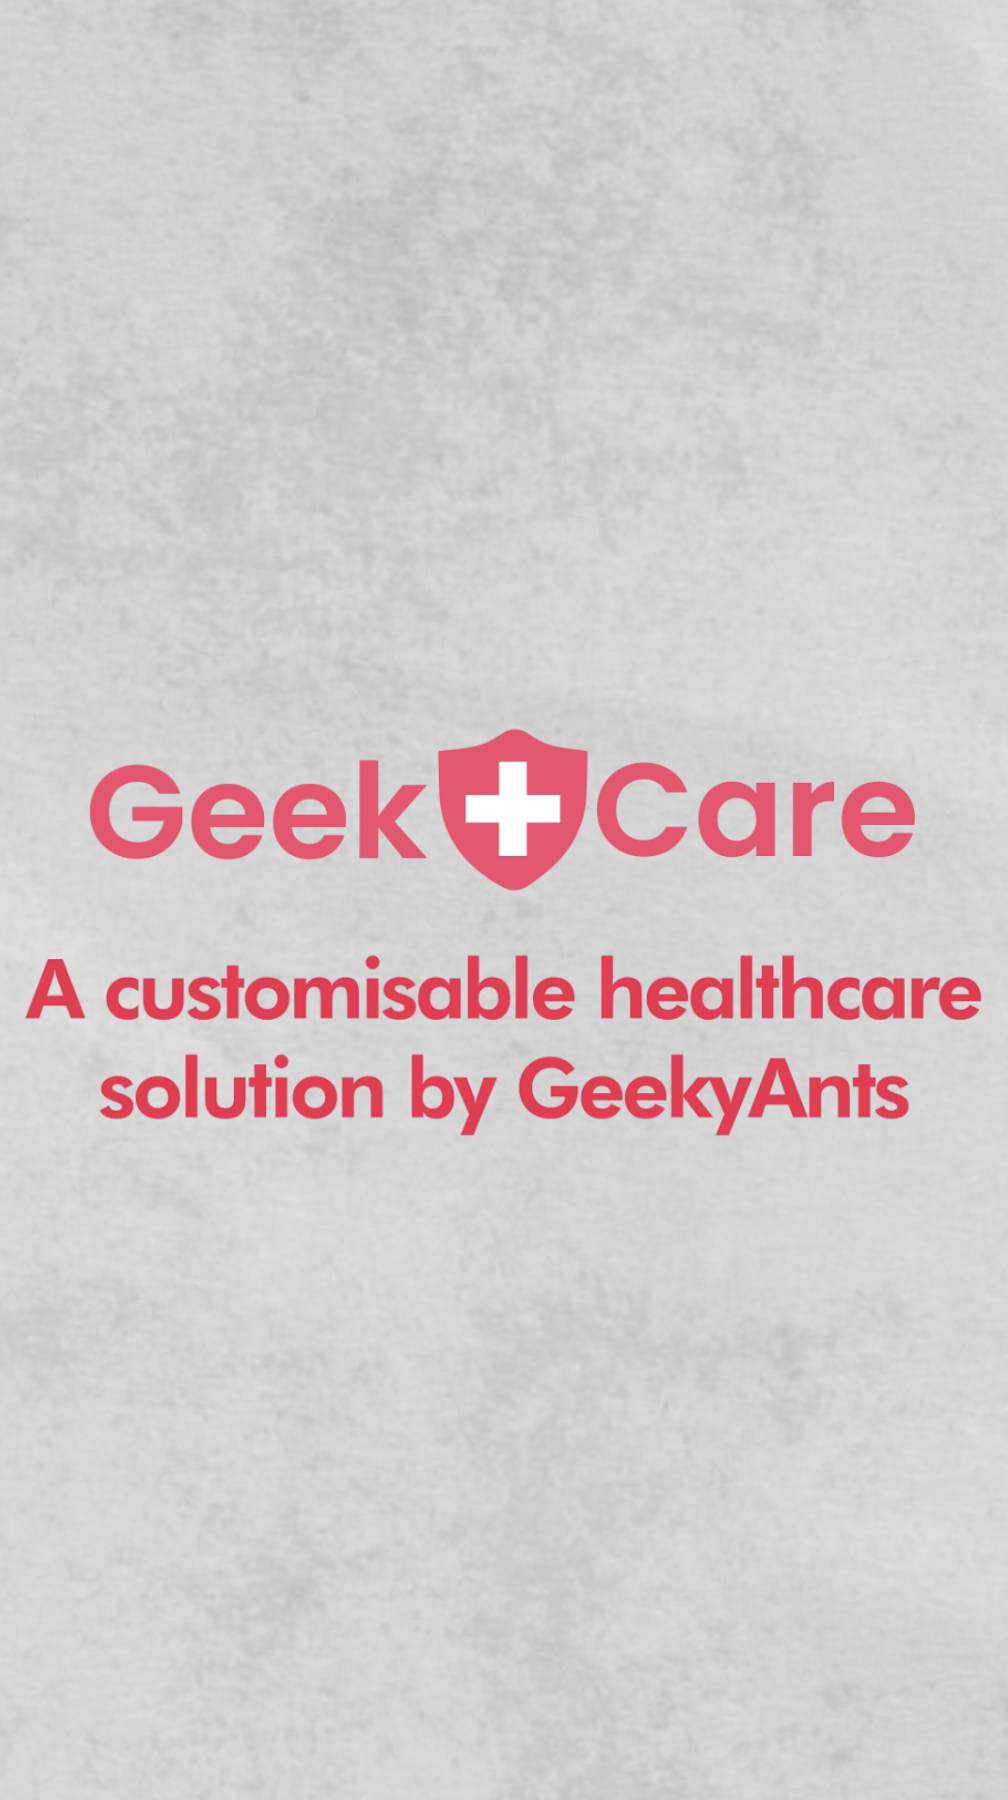 What Is GeekCare?